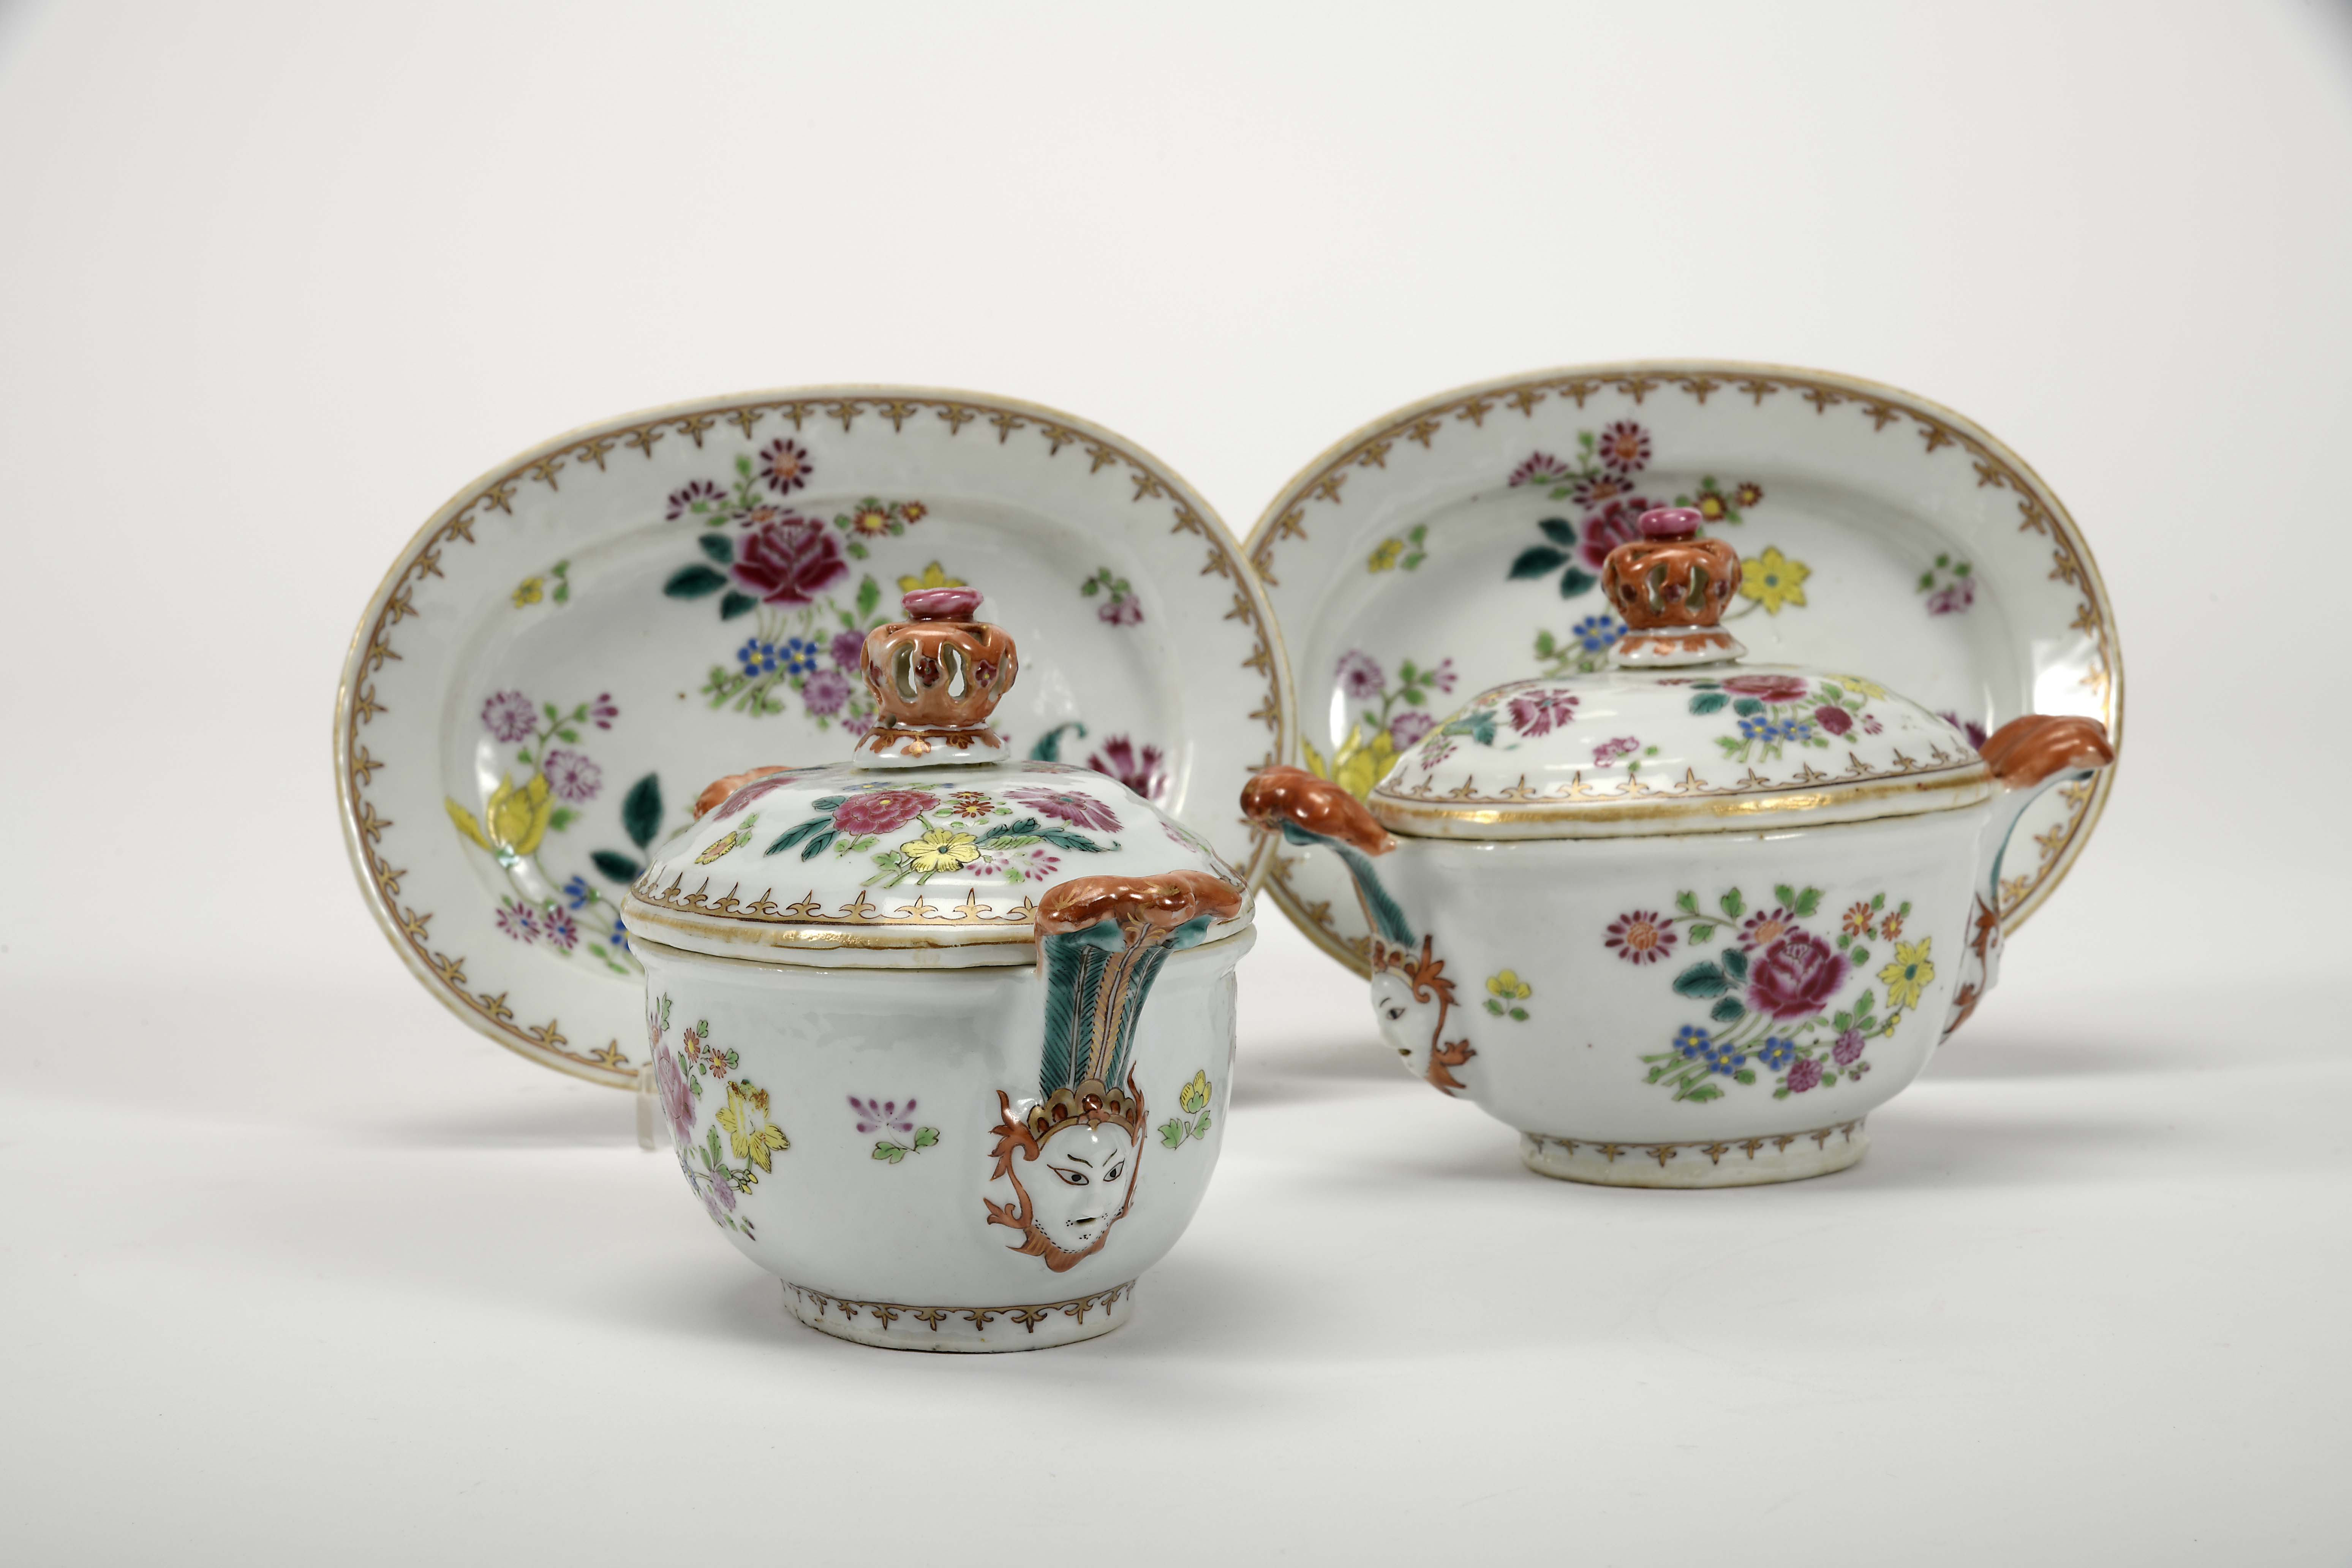 A pair of small tureens with stands - Image 5 of 5